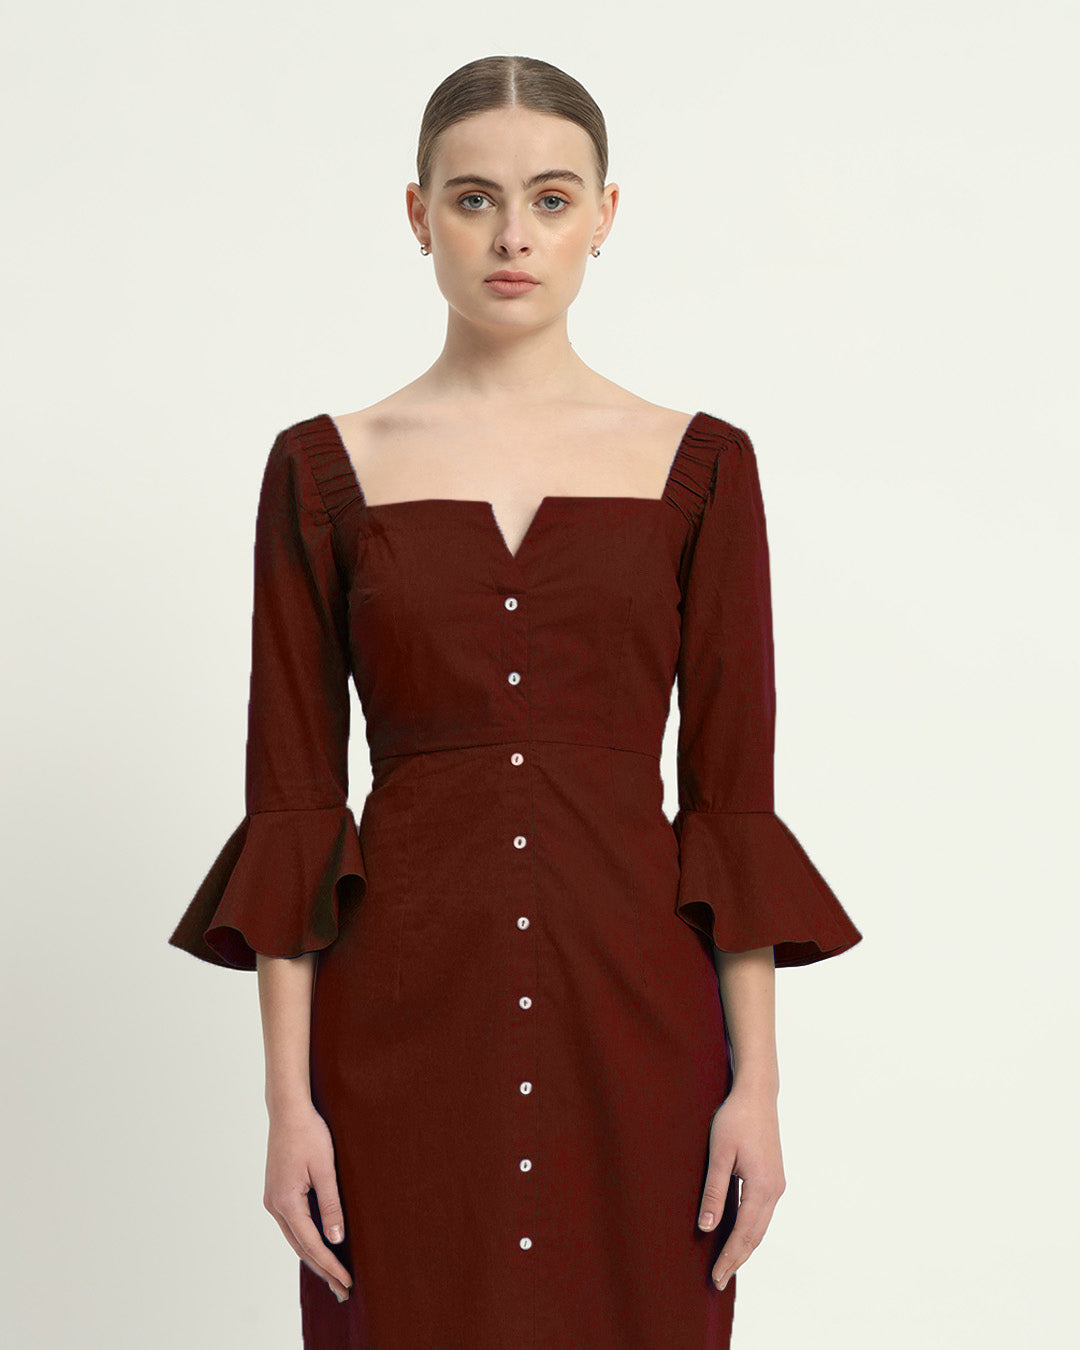 The Rouge Rosendale Cotton Dress